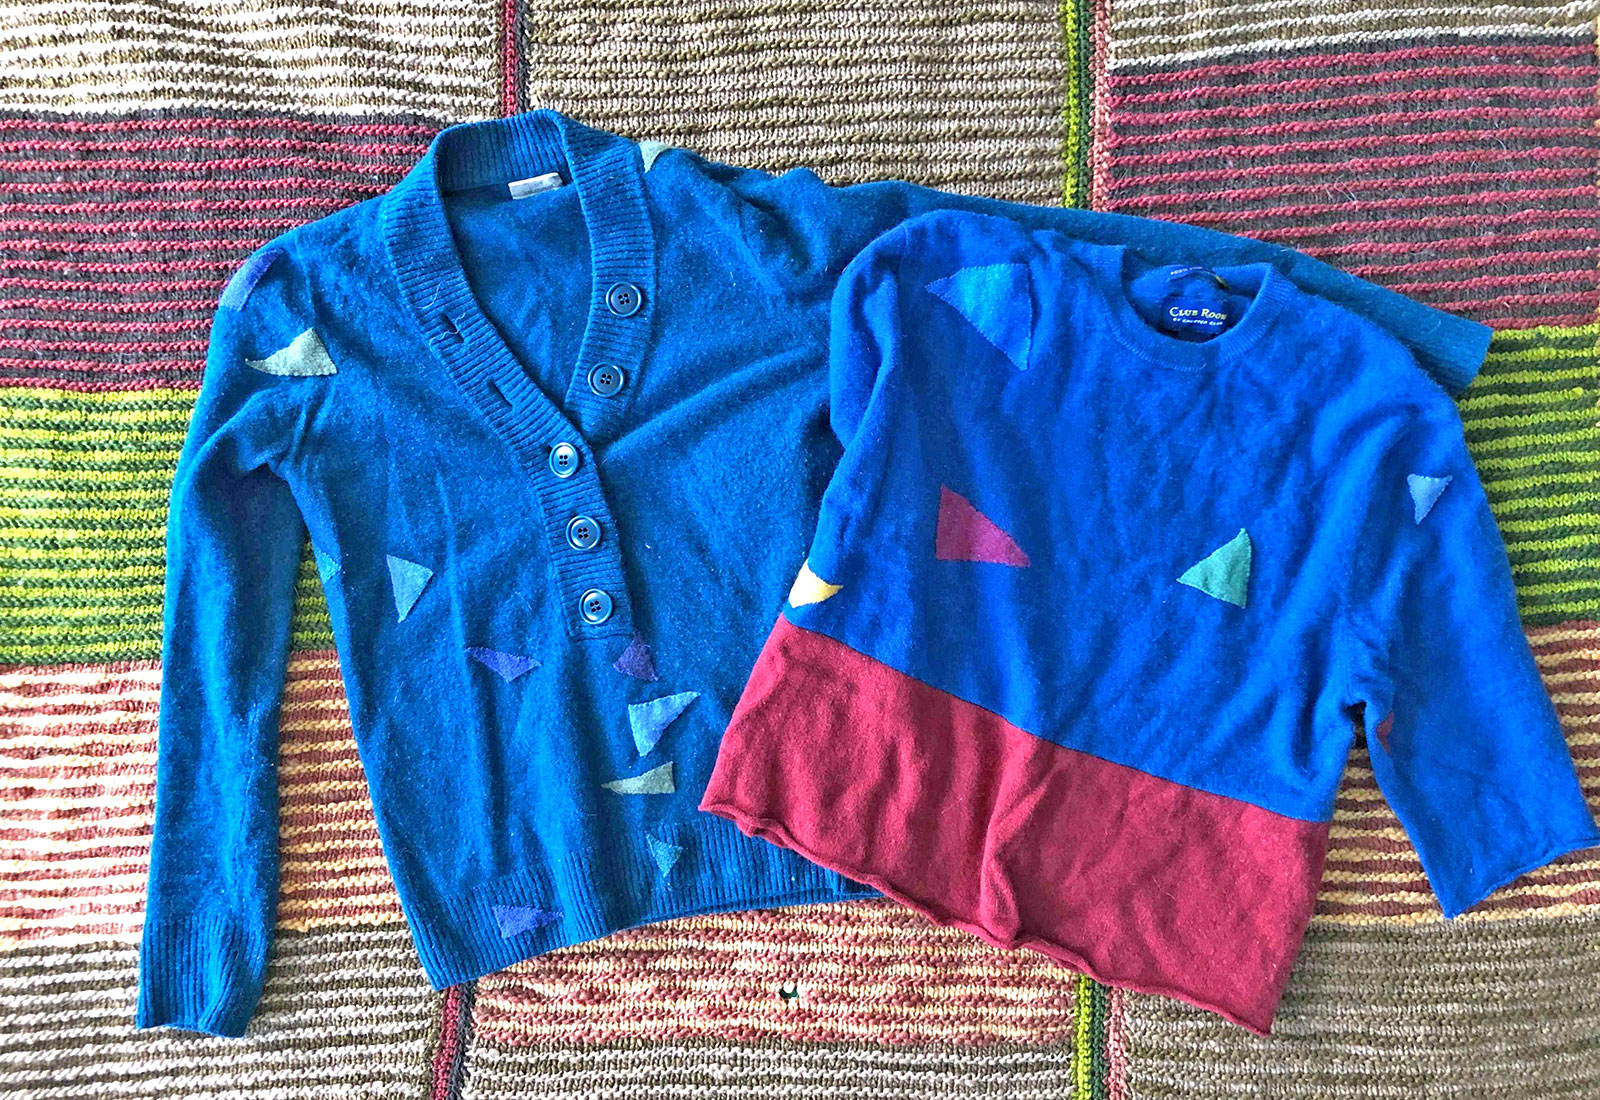 Two blue sweaters with triangular patches on top of a colorful green and red blanket